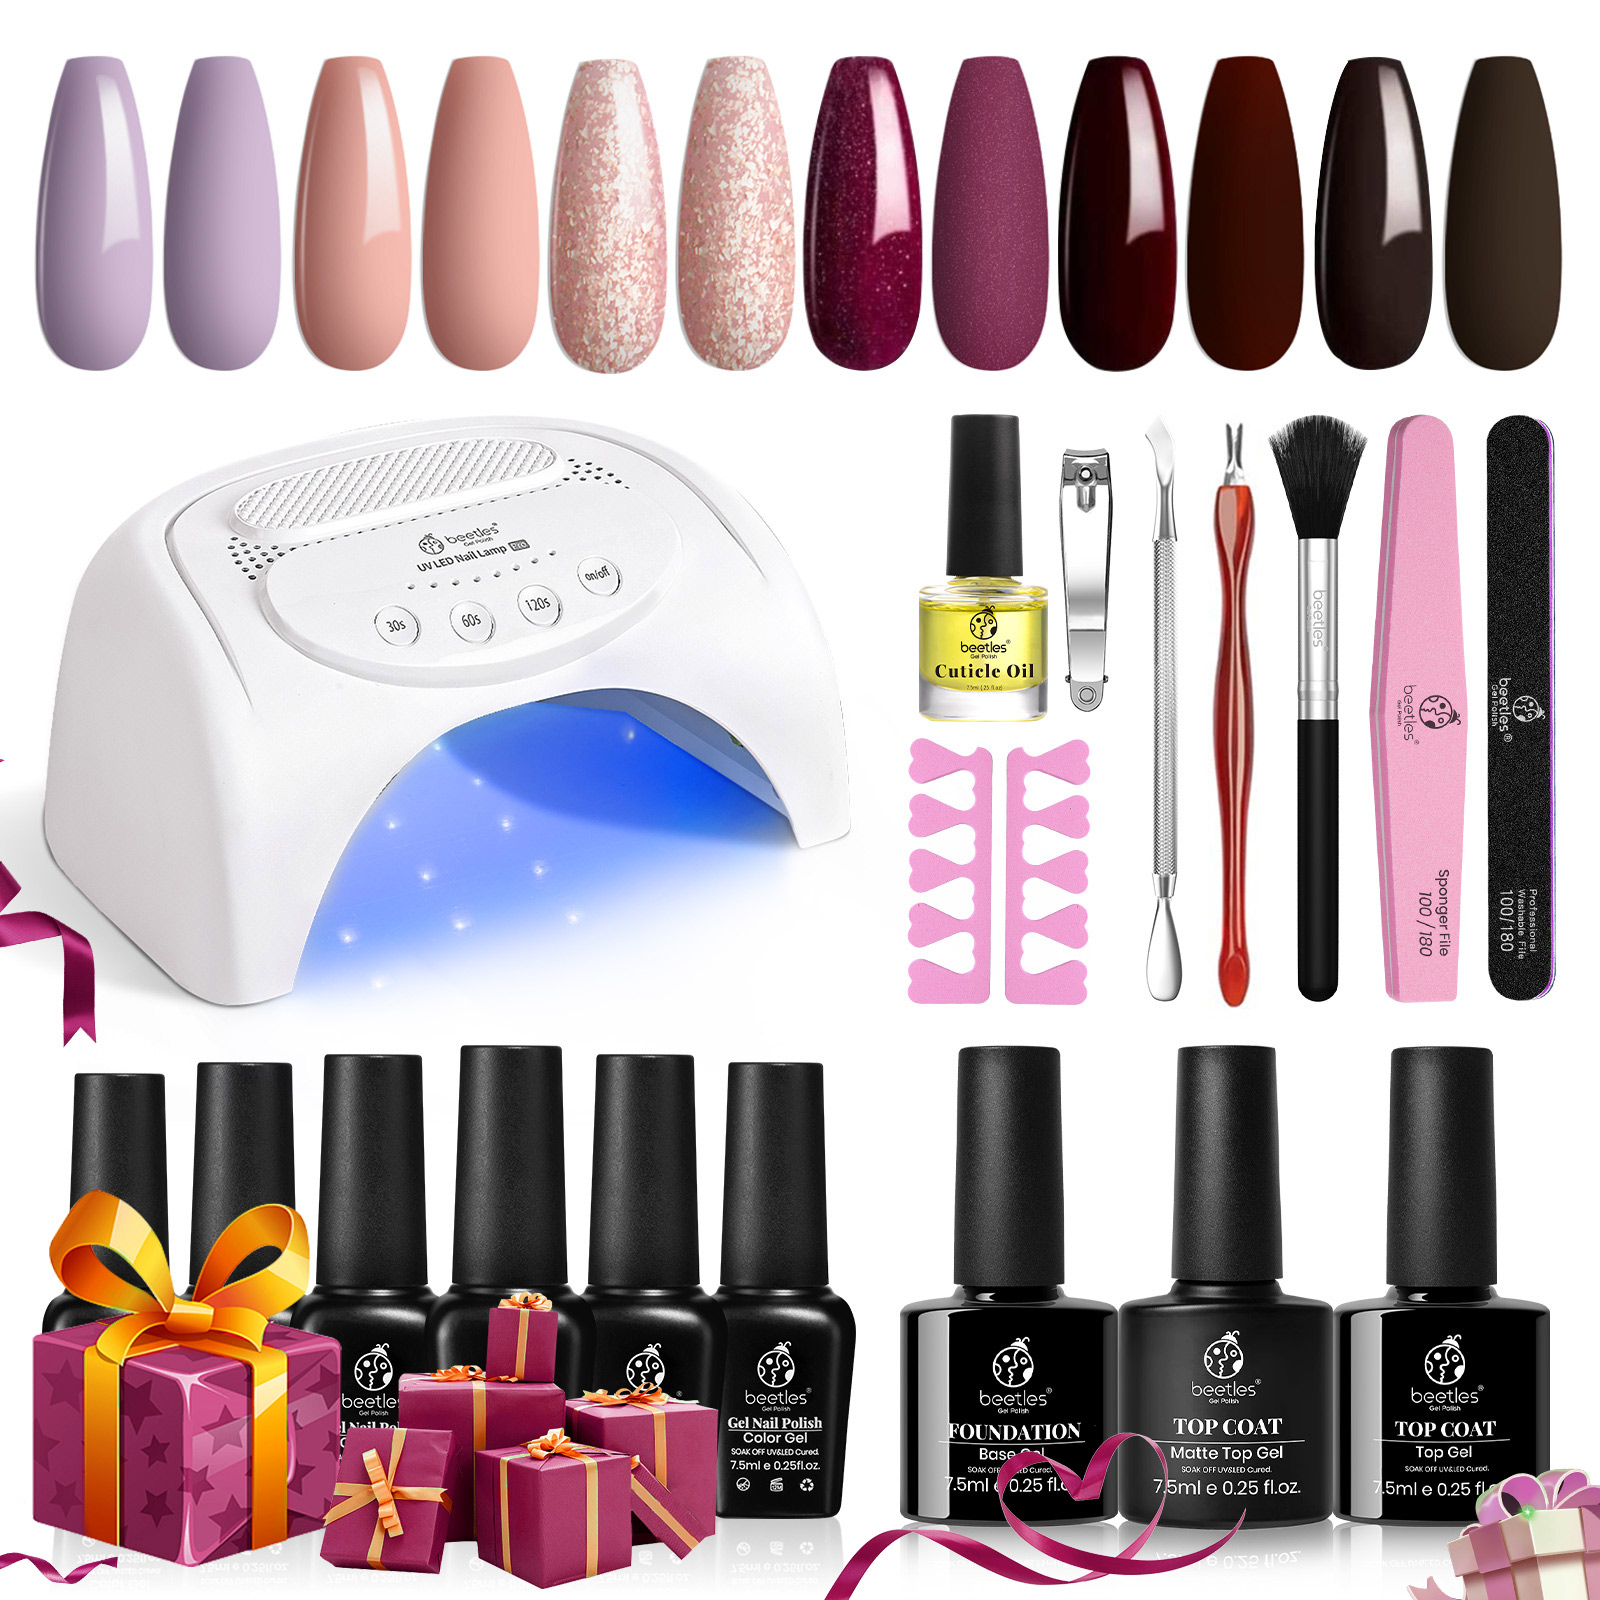 20 Colours Gel Nail Polish Set With UV Nail Lamp Manicure Starter